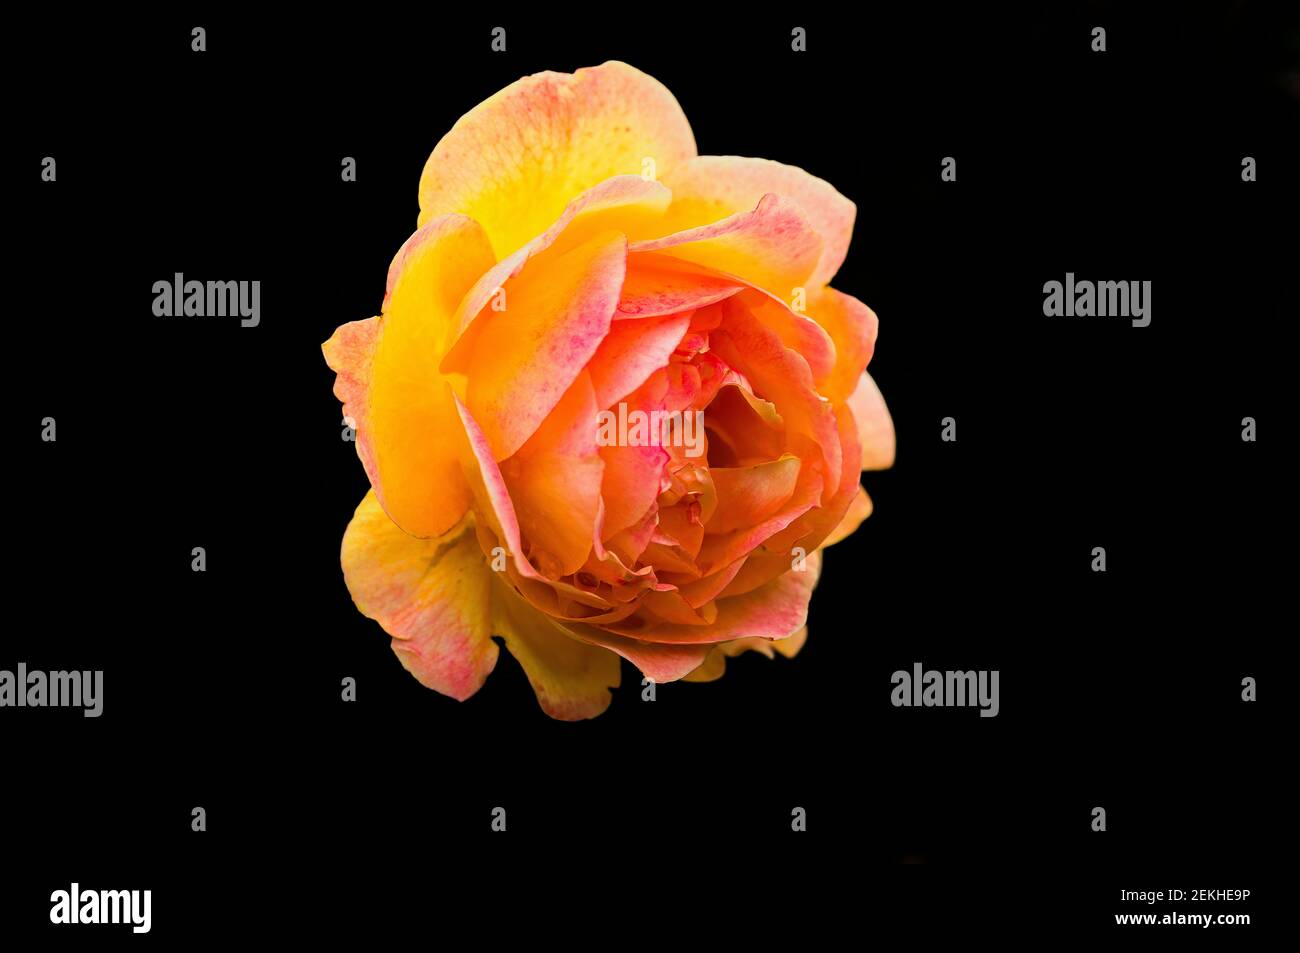 Yellow and pink rose flower head in black background Stock Photo